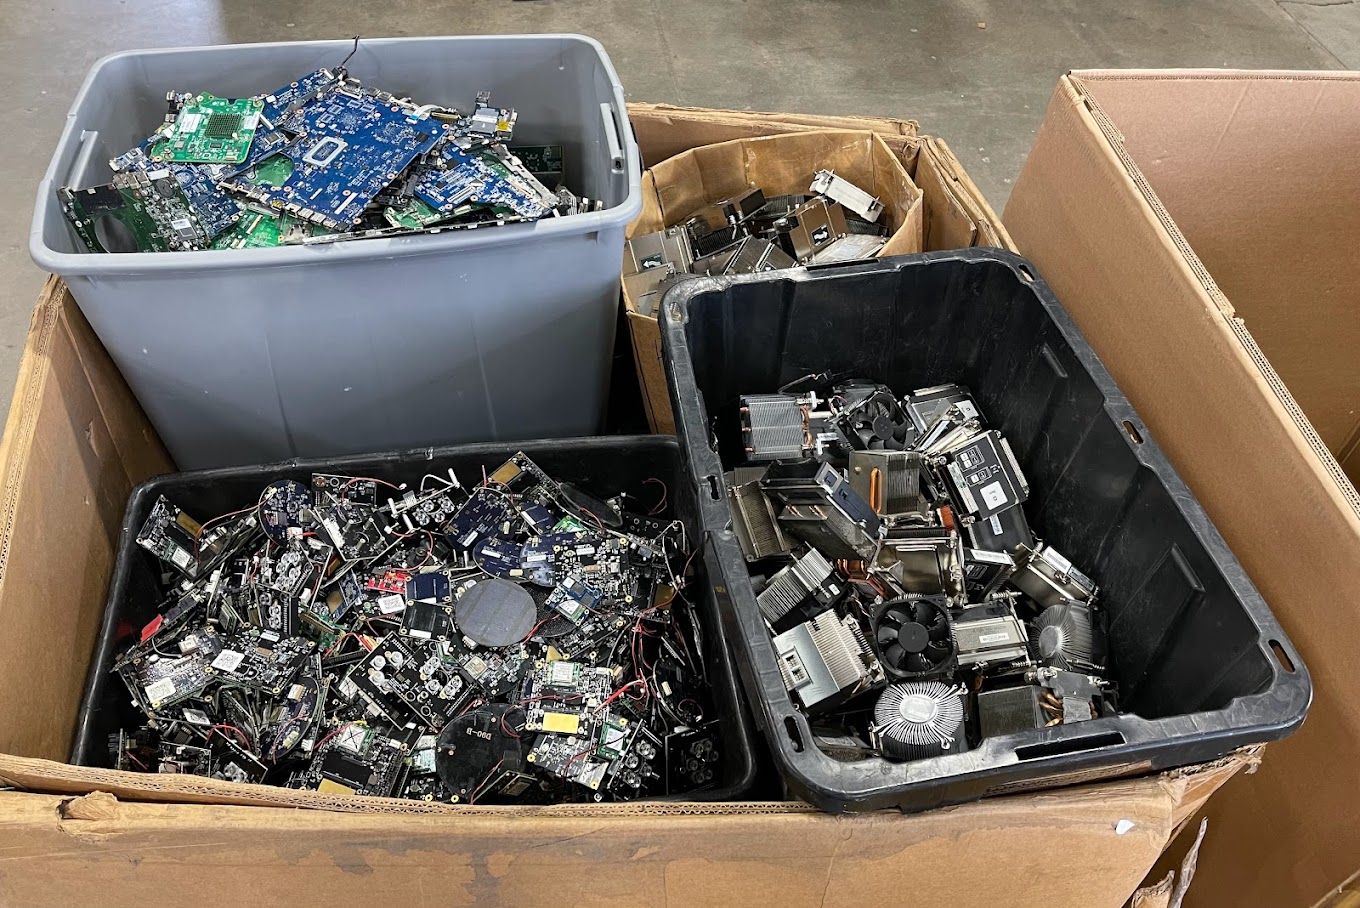 Smyrna's eco-friendly approach to electronic recycling, offering services in the disposal of electronics and IT equipment, with a focus on sustainable practices.